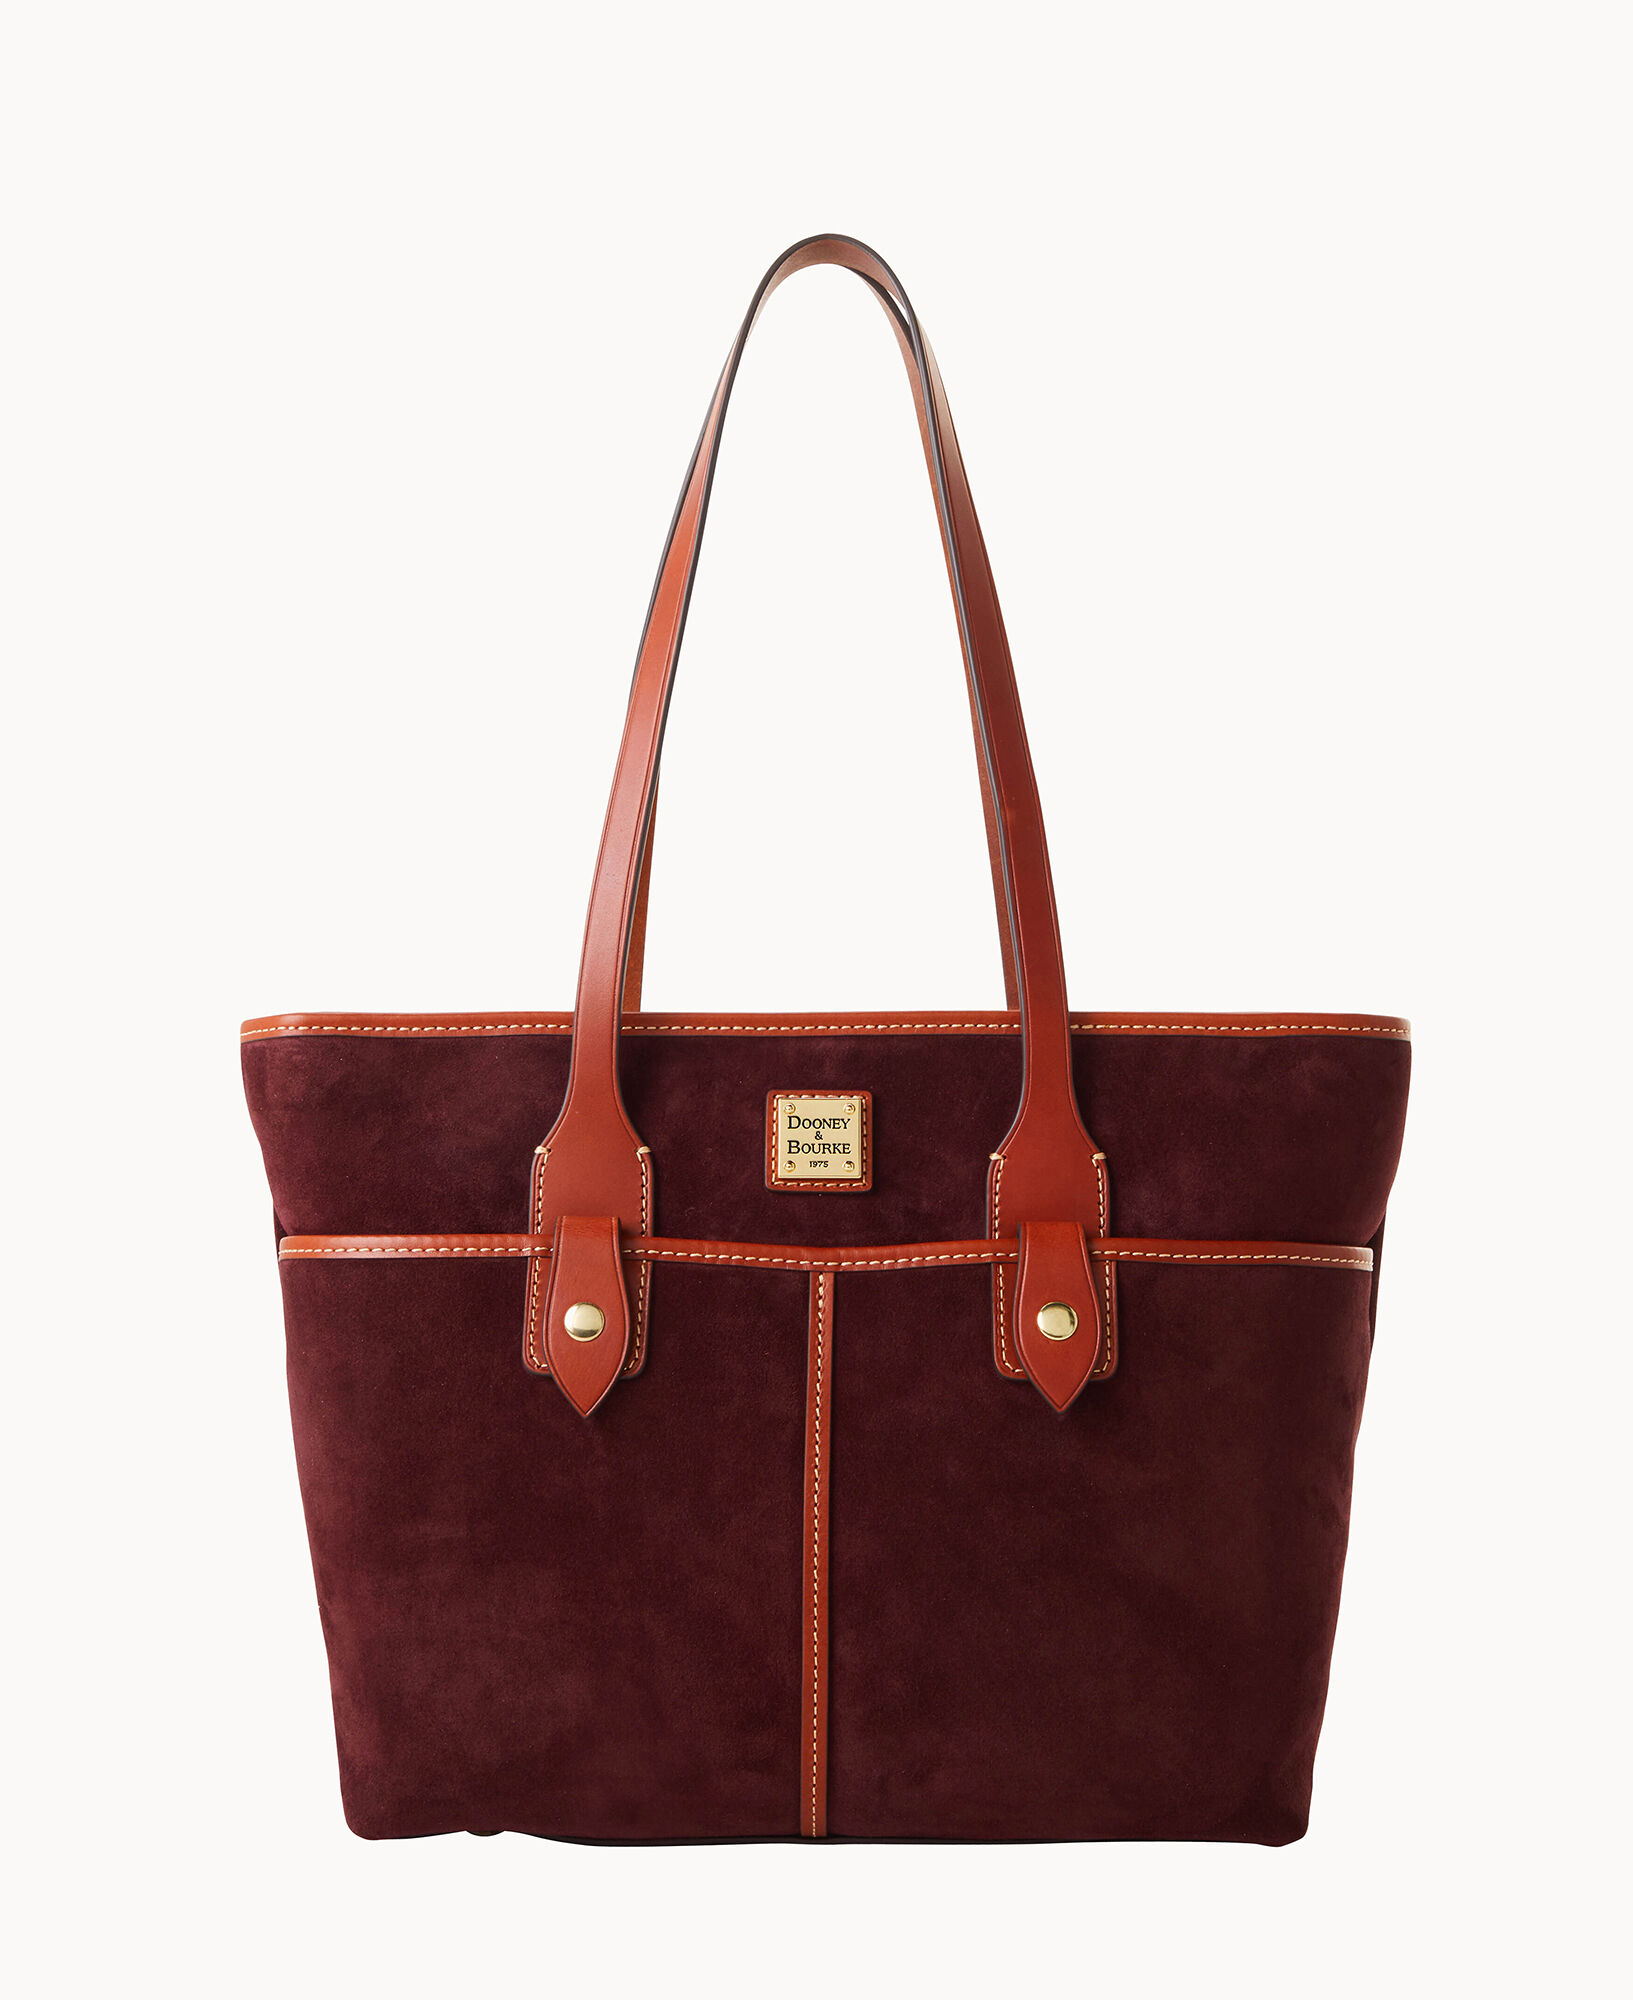 Dooney & Bourke Signature Fabric Double Pocket Tote Brown *moro Leather -  $195 - From Katie